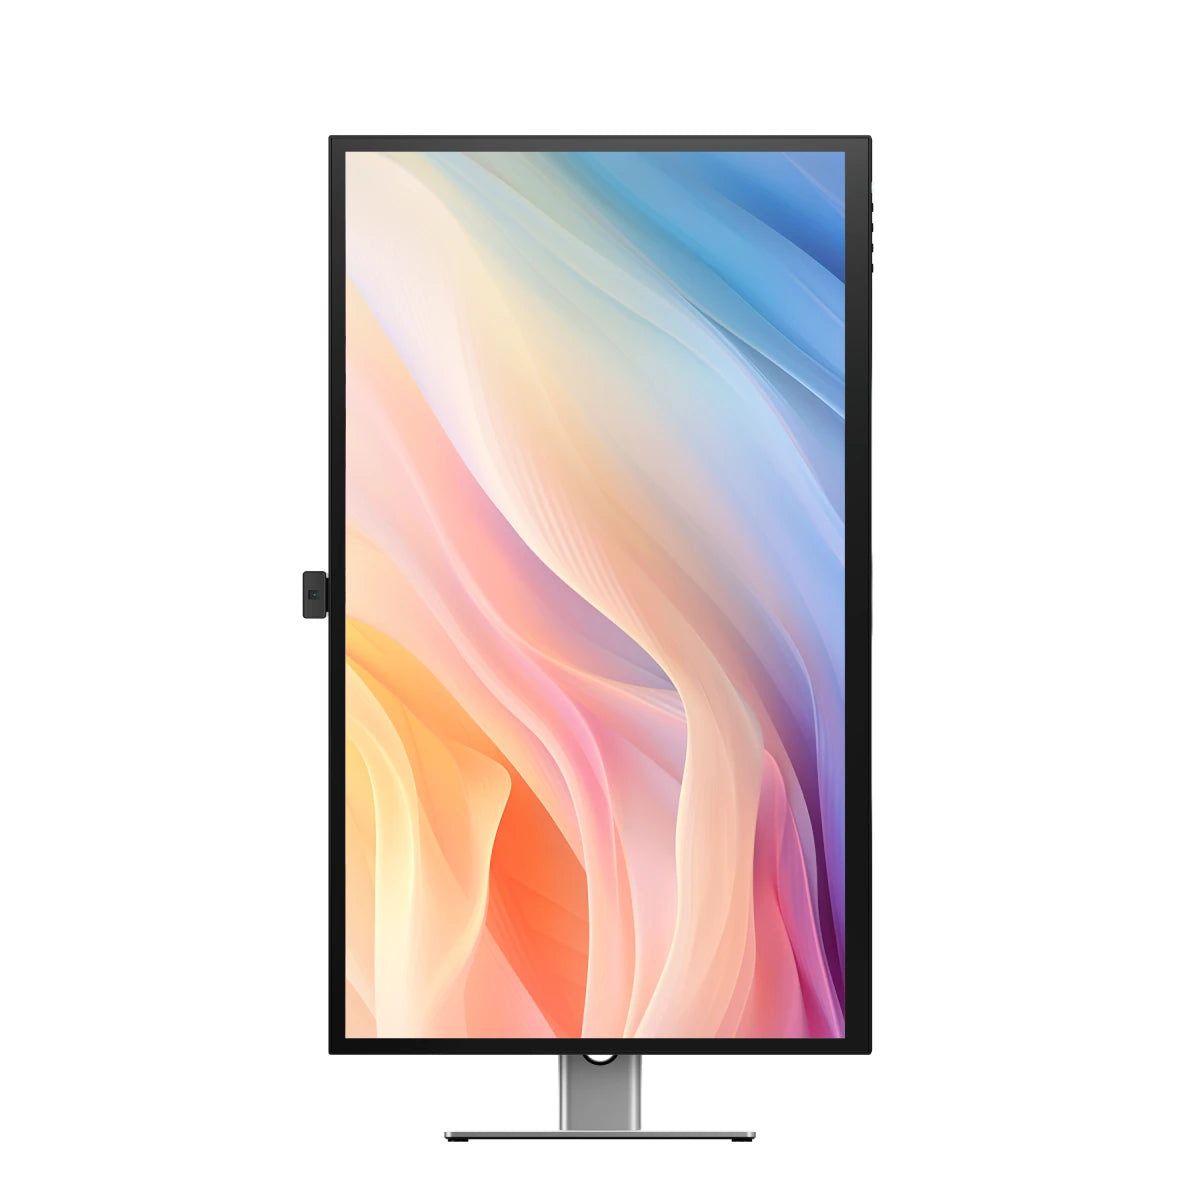 Clarity Max Pro 32" UHD 4K Monitor with USB-C Power Delivery and Webcam